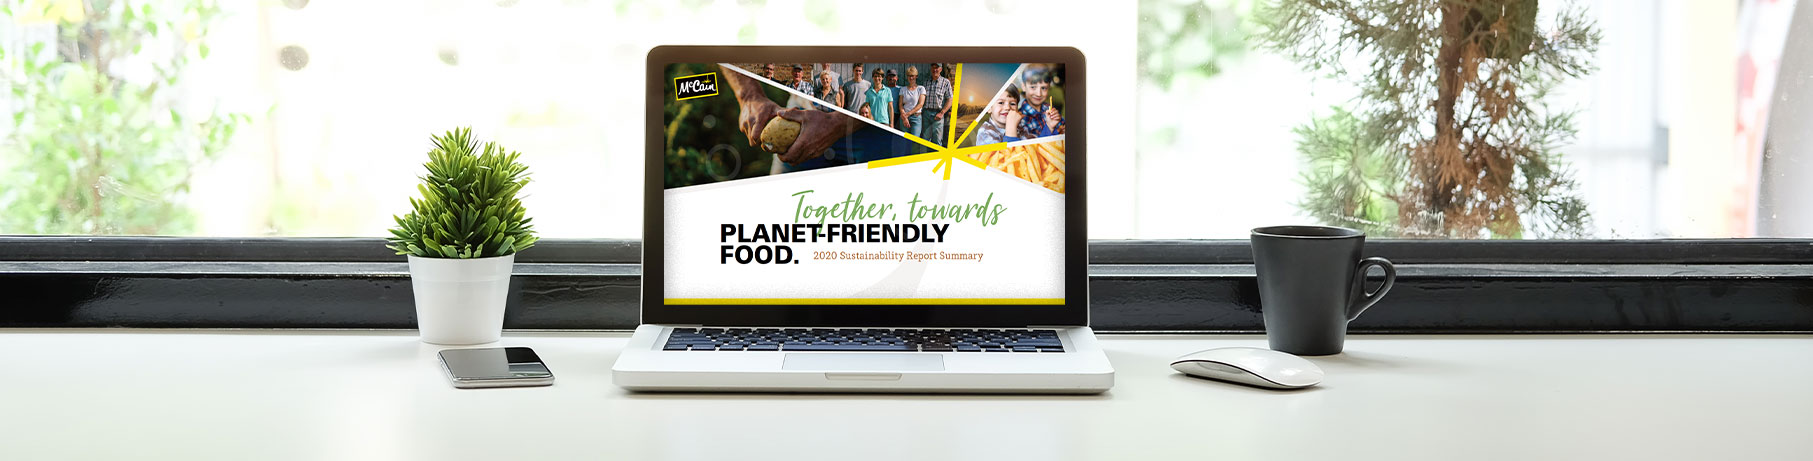 McCain Foods '2020 Sustainability Report' on laptop.